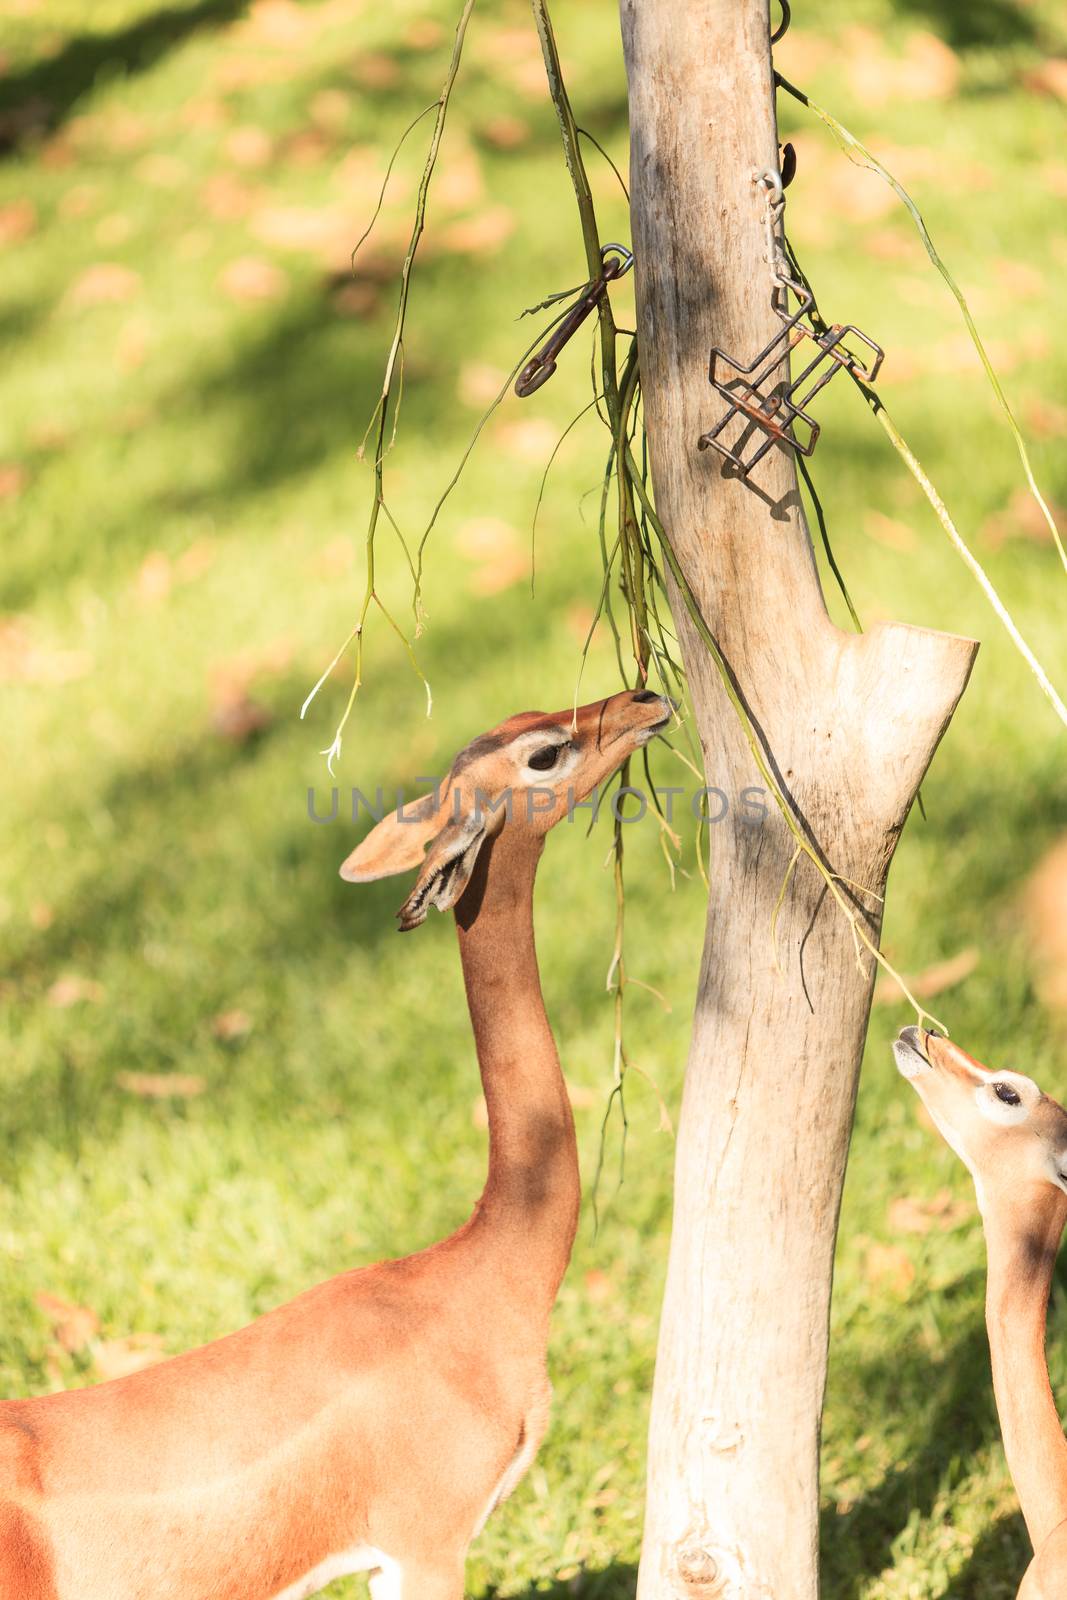 Southern gerenuk, Litocranius walleri, eat leaves off a tree in Africa on the grasslands.